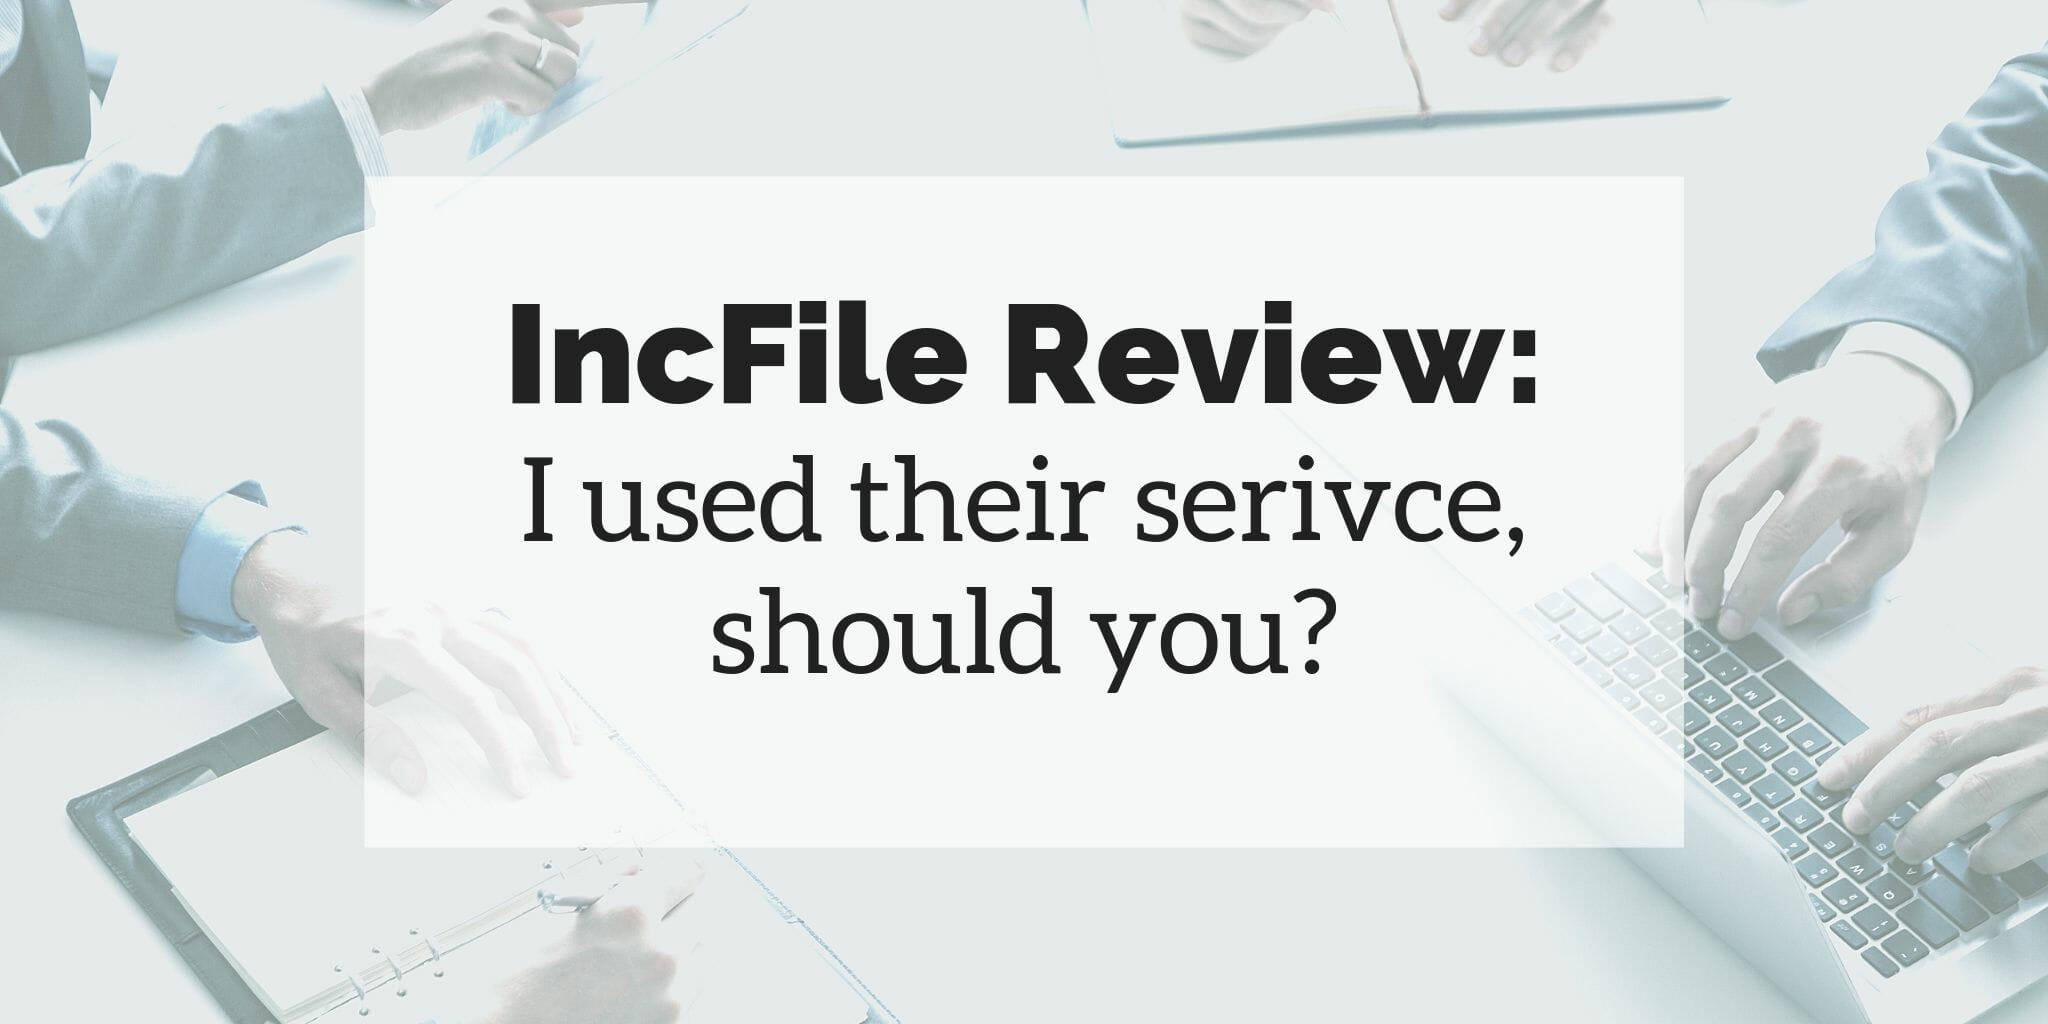 Is Incfile Worth It